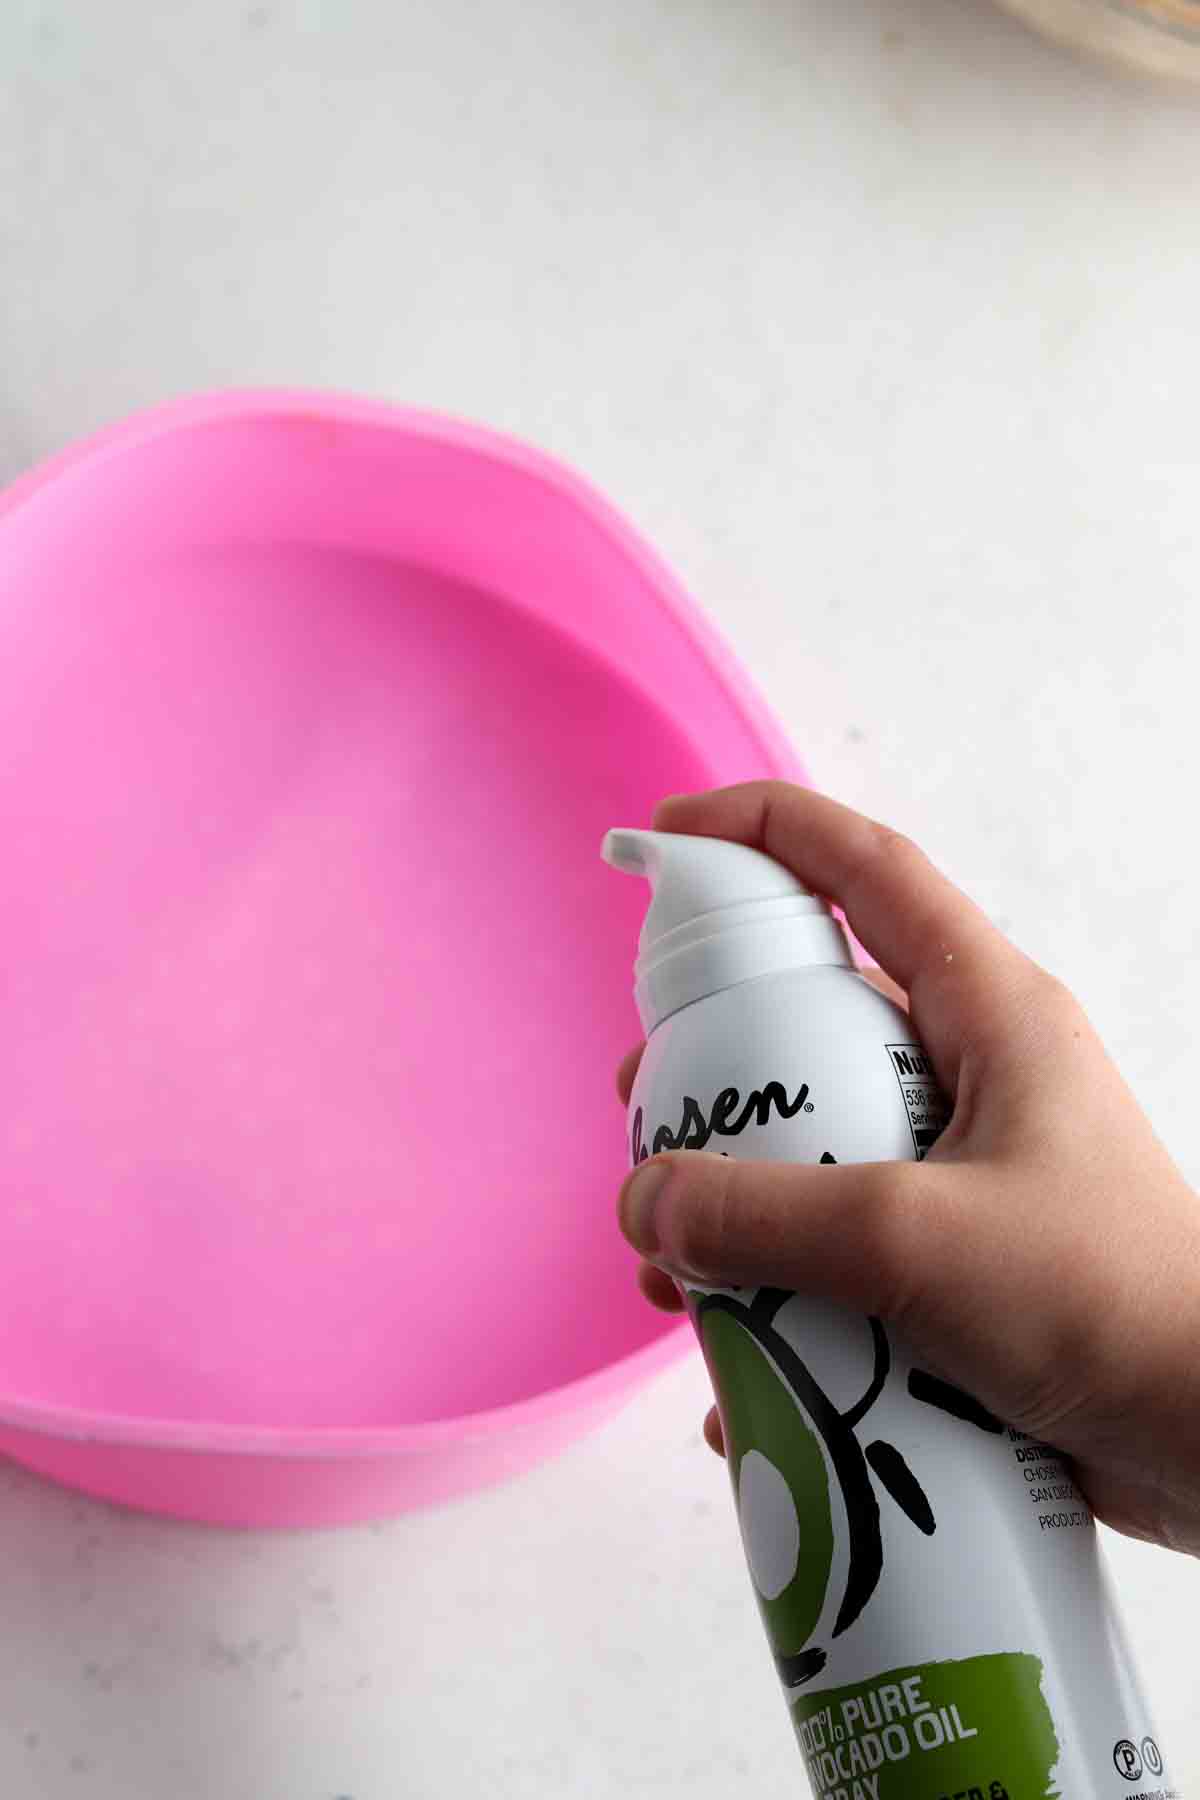 9 inch pink silicone baking cake pan with avocado oil spray.